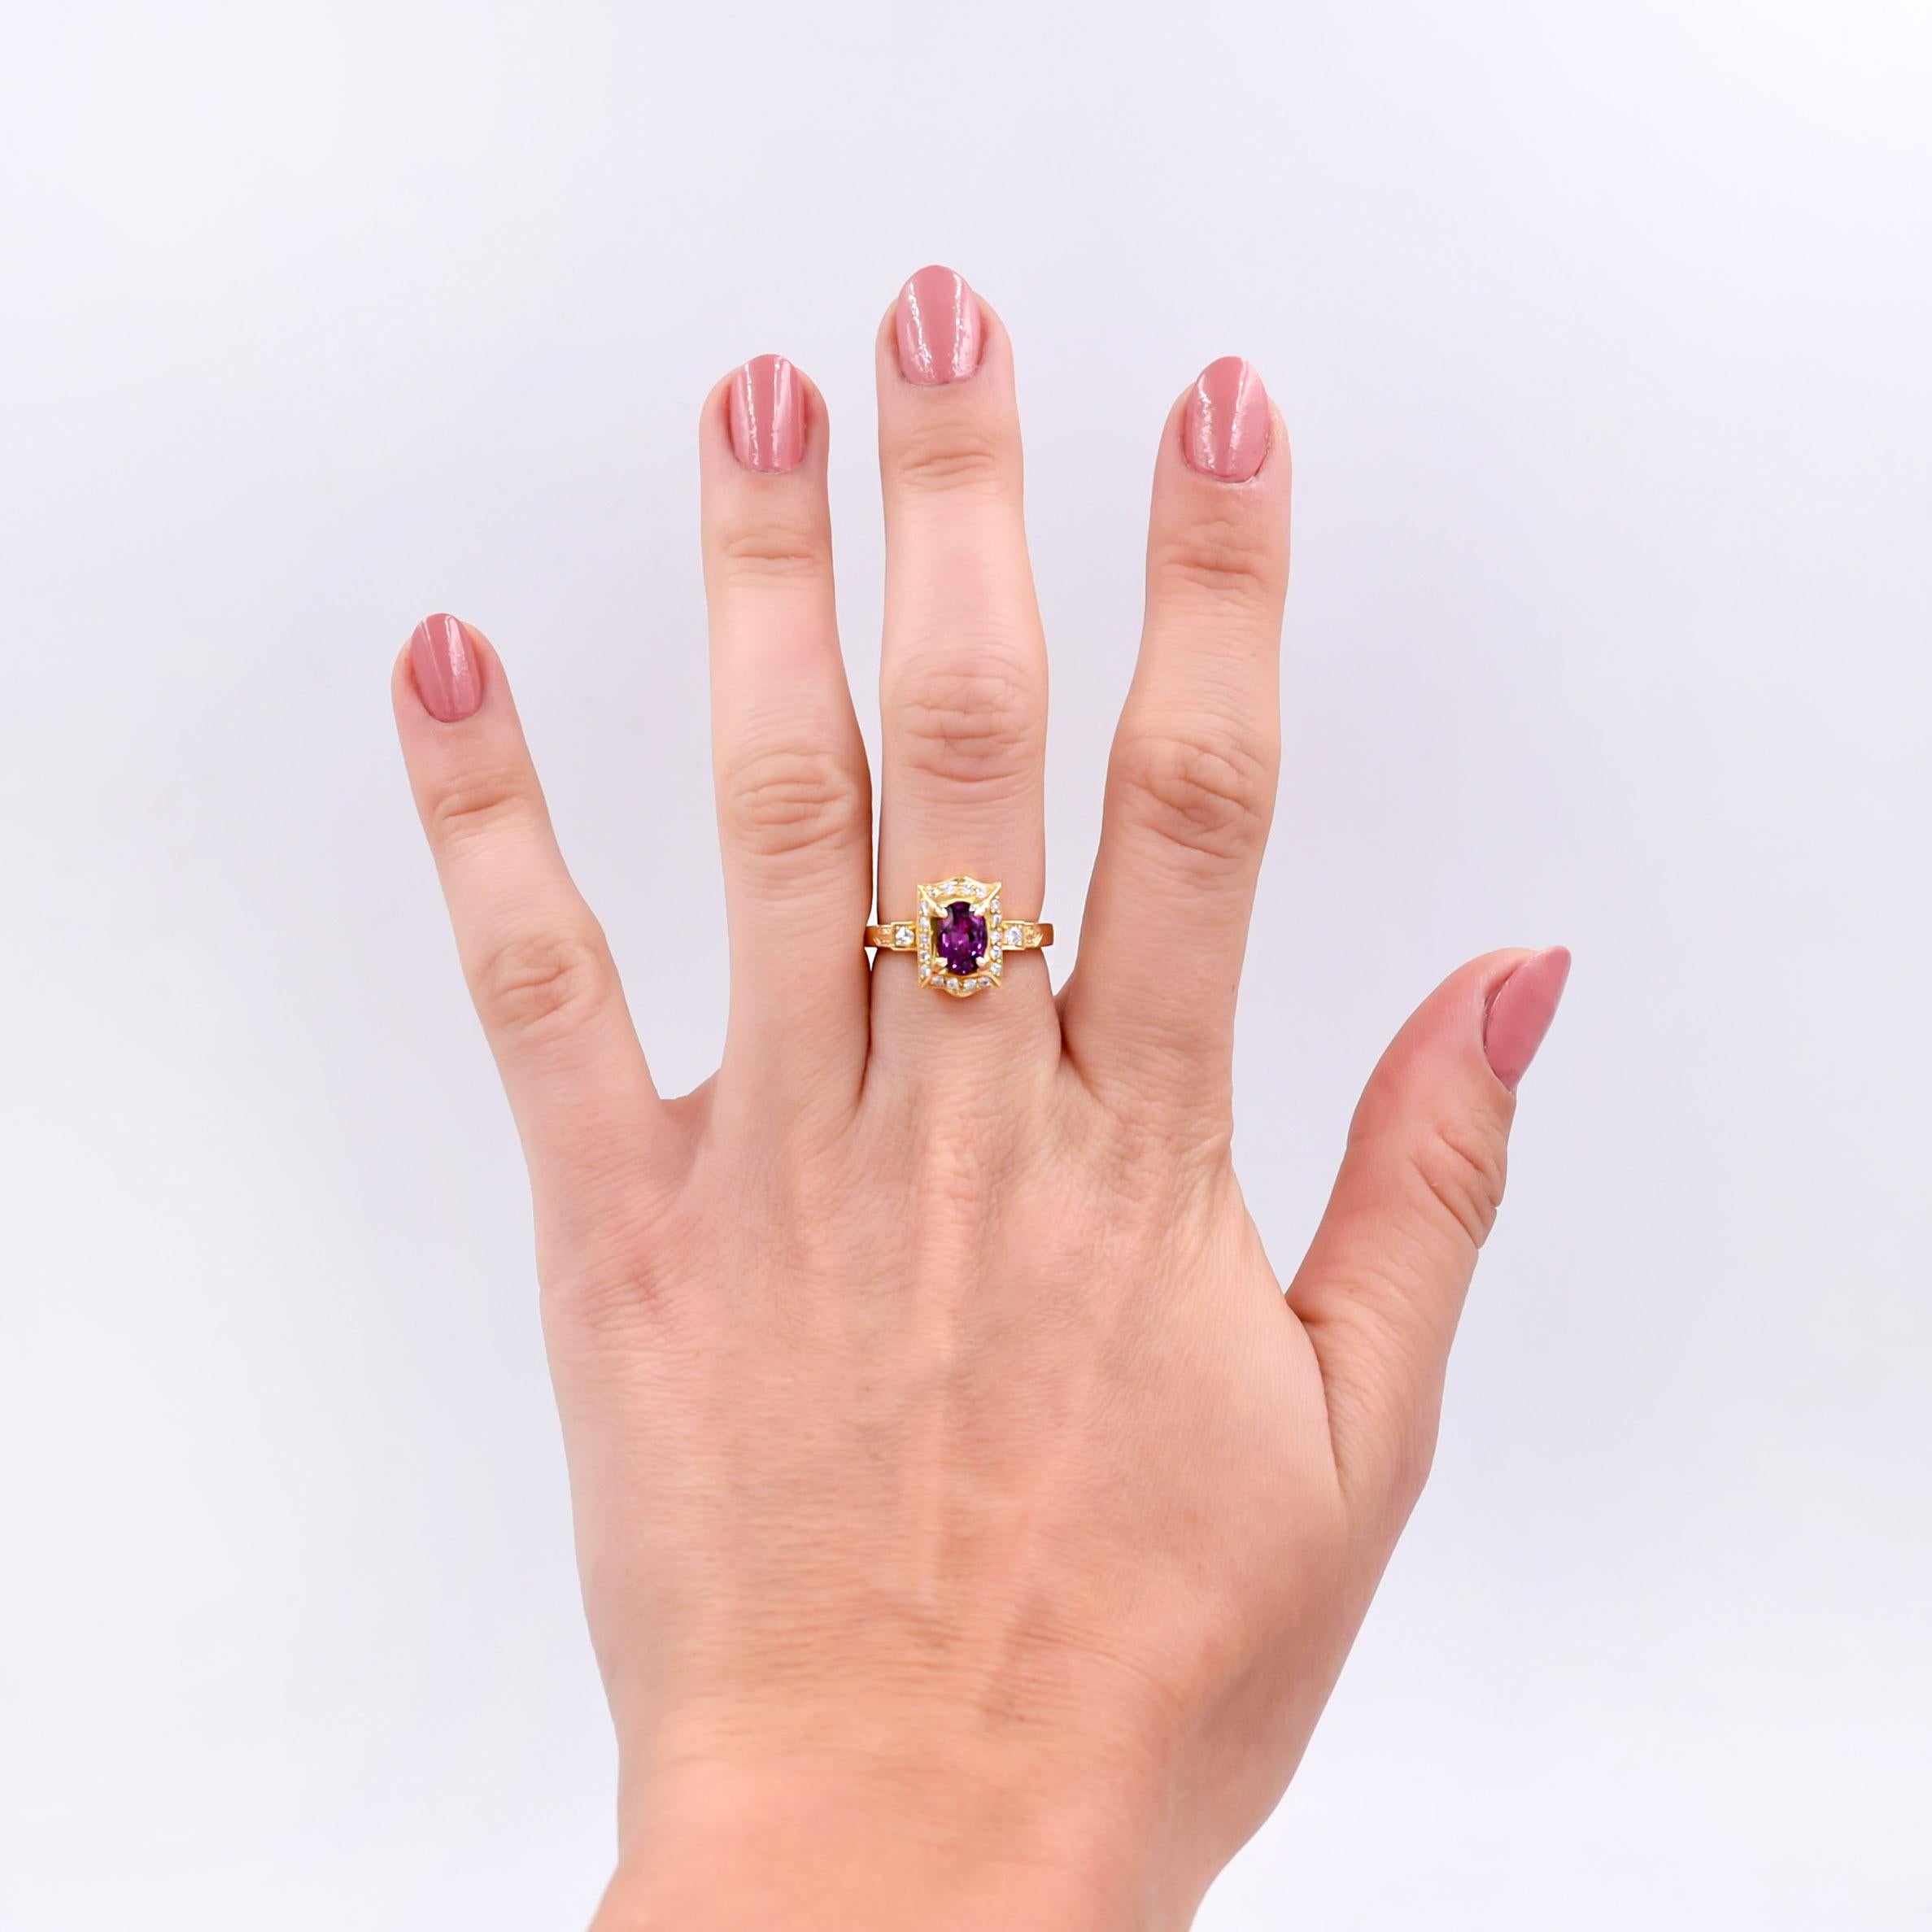 Carl Priolo 1.10 Carat Oval Pink Sapphire and Diamond Statement Ring in 18K Gold For Sale 7